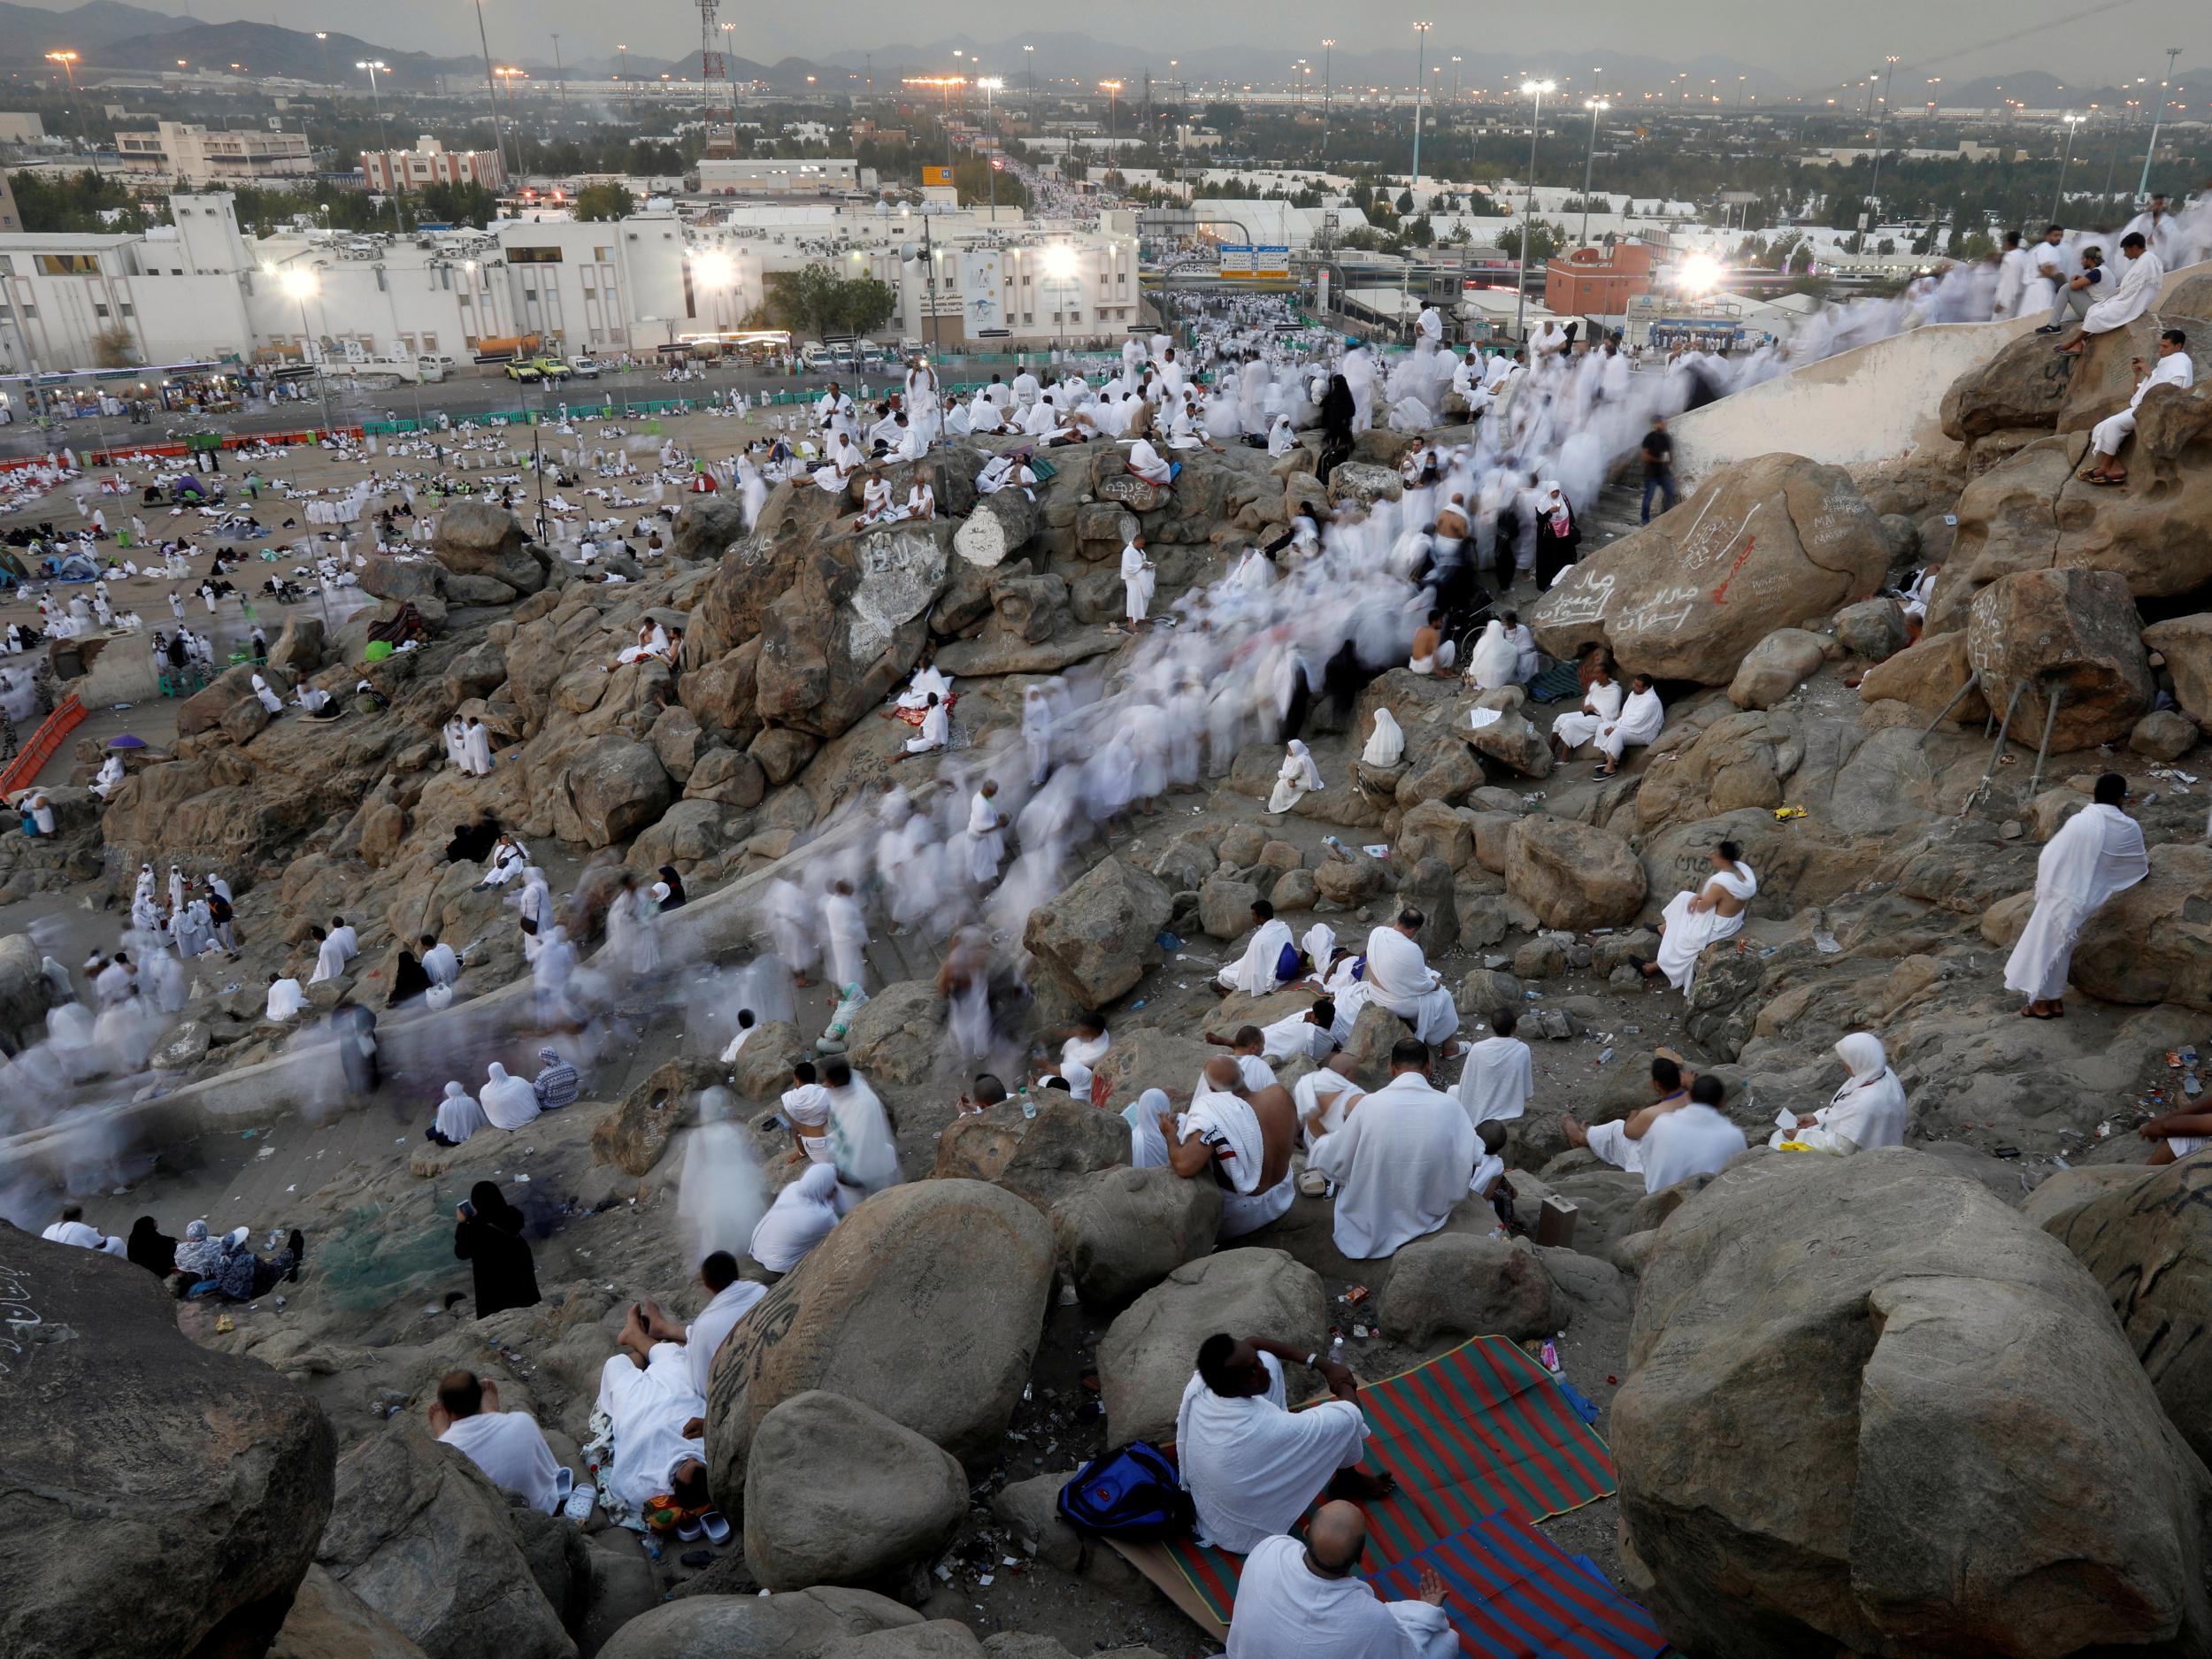 Muslim pilgrims gather on Mount Mercy on the plains of Arafat during the annual hajj pilgrimage outside the holy city of Mecca, Saudi Arabia